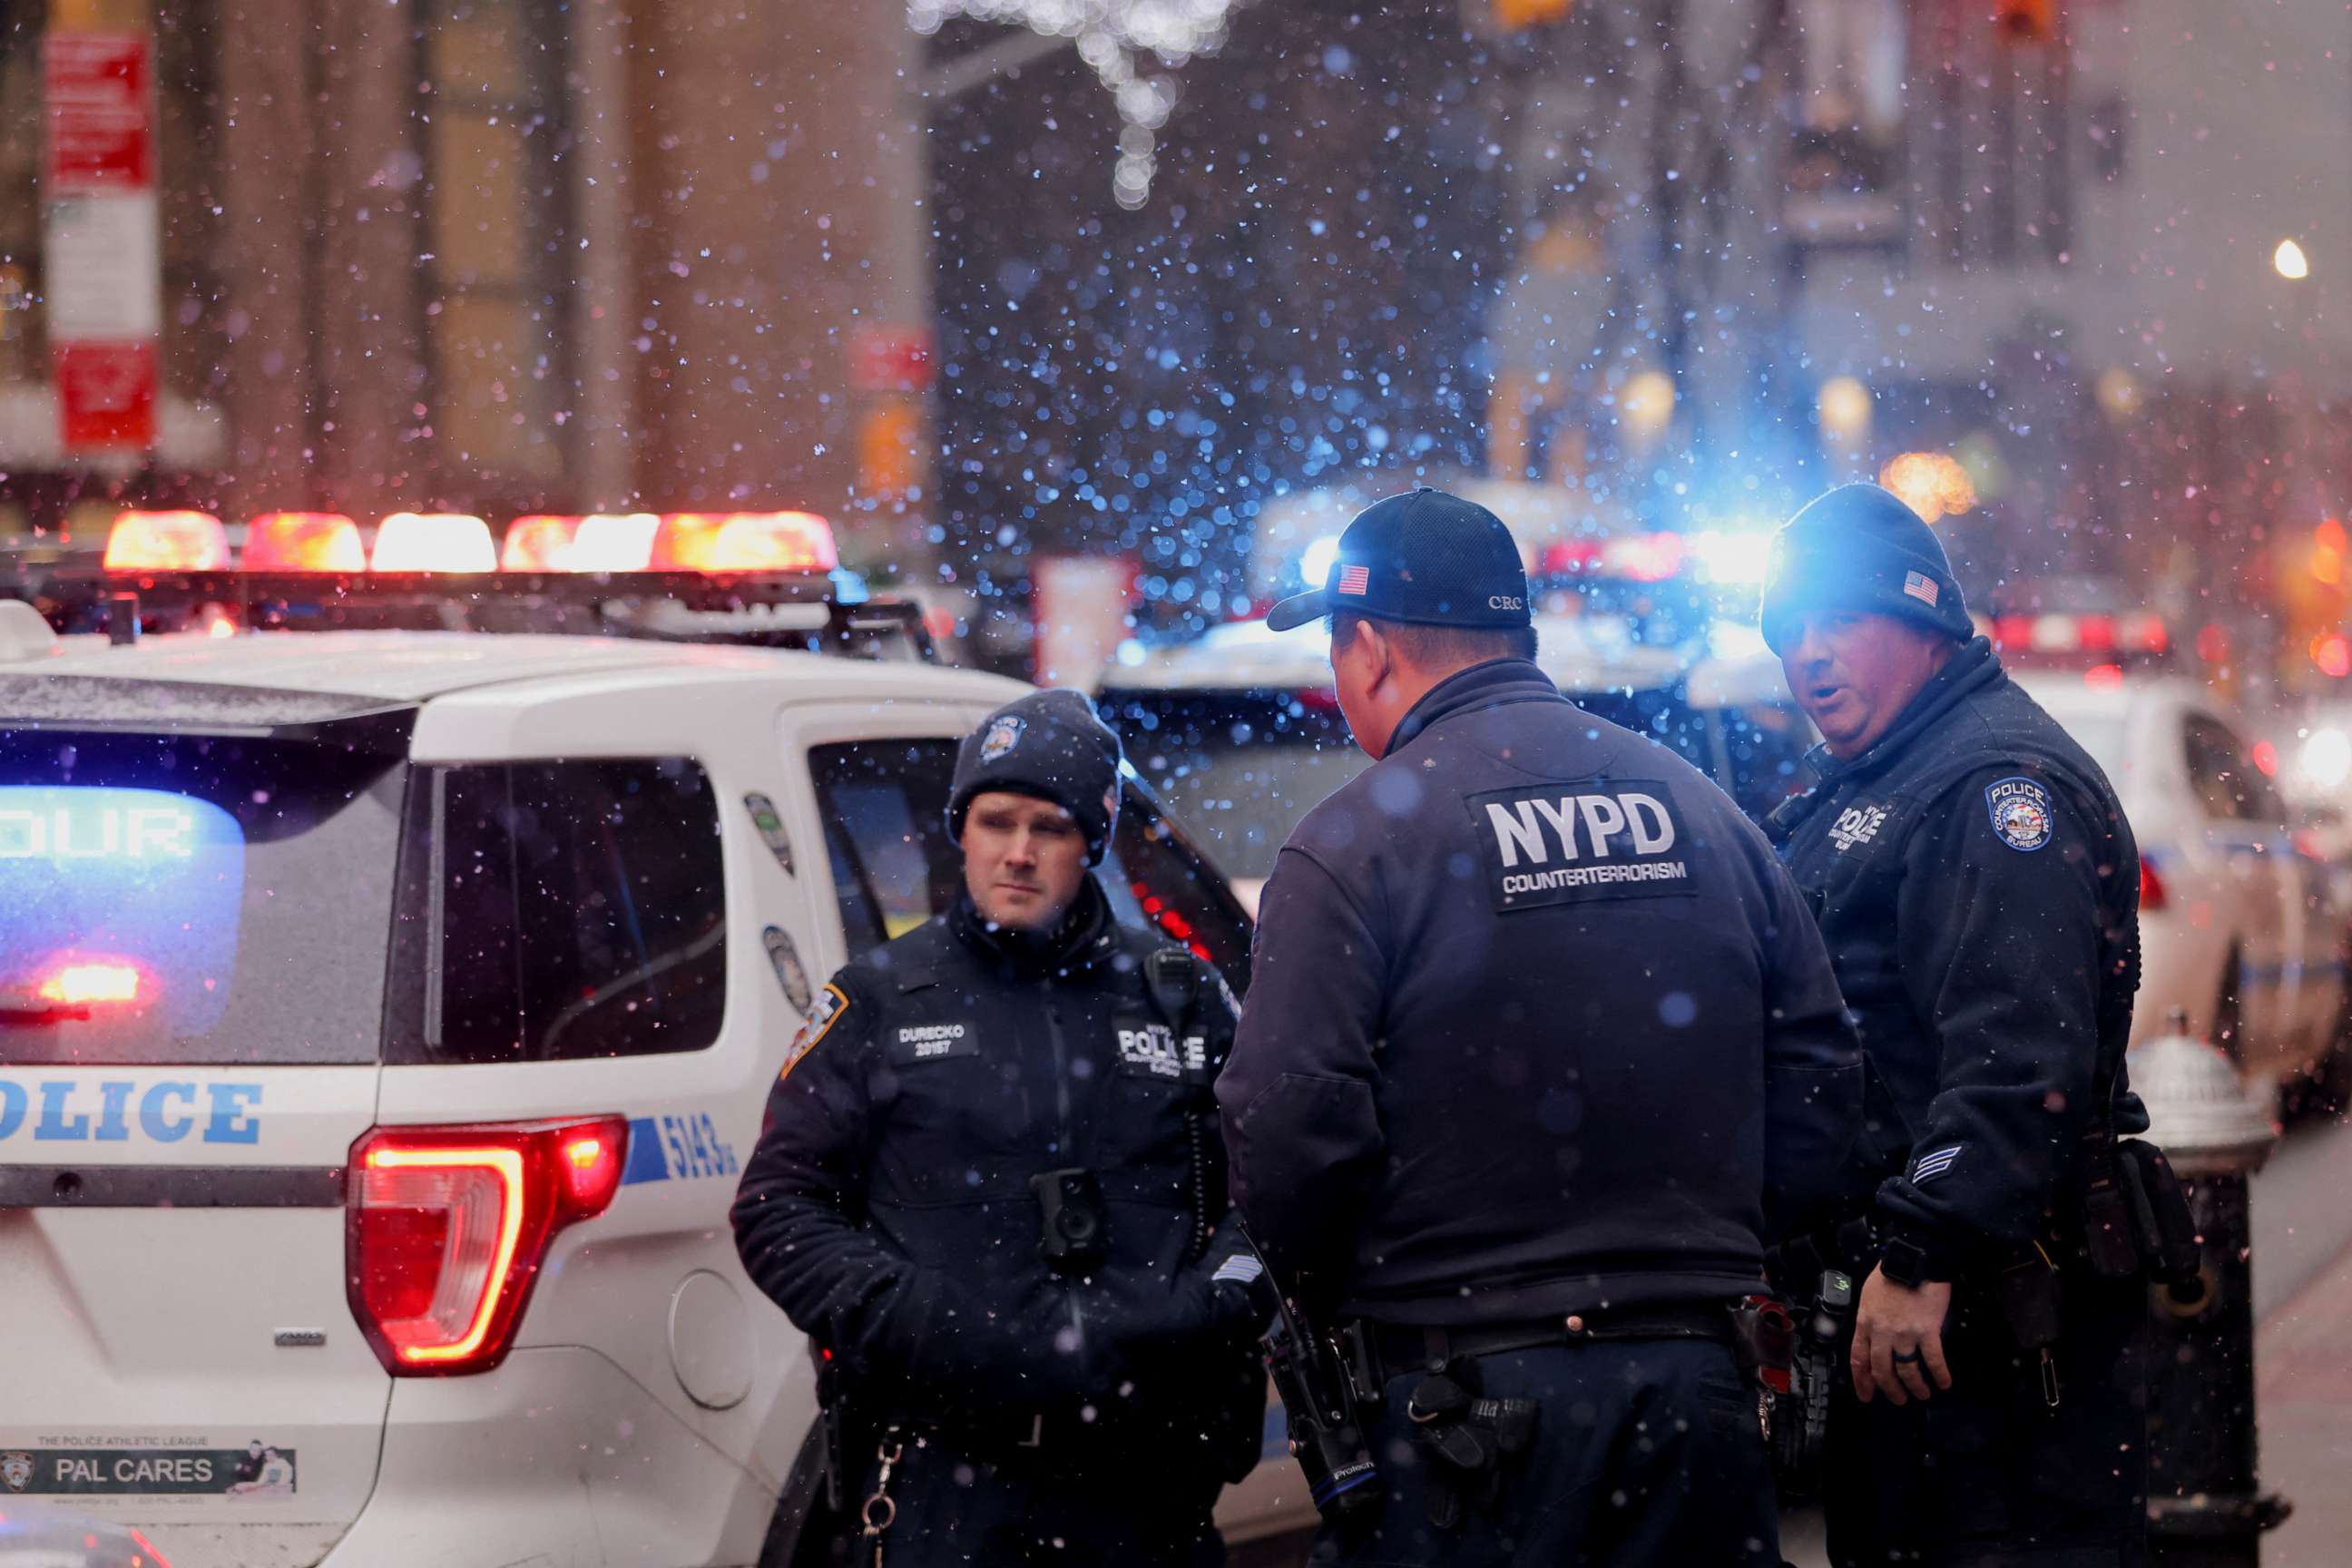 PHOTO: Members of the New York City Police Department gather at the entrance of the Museum of Modern Art after an alleged multiple stabbing incident, in New York, March 12, 2022.